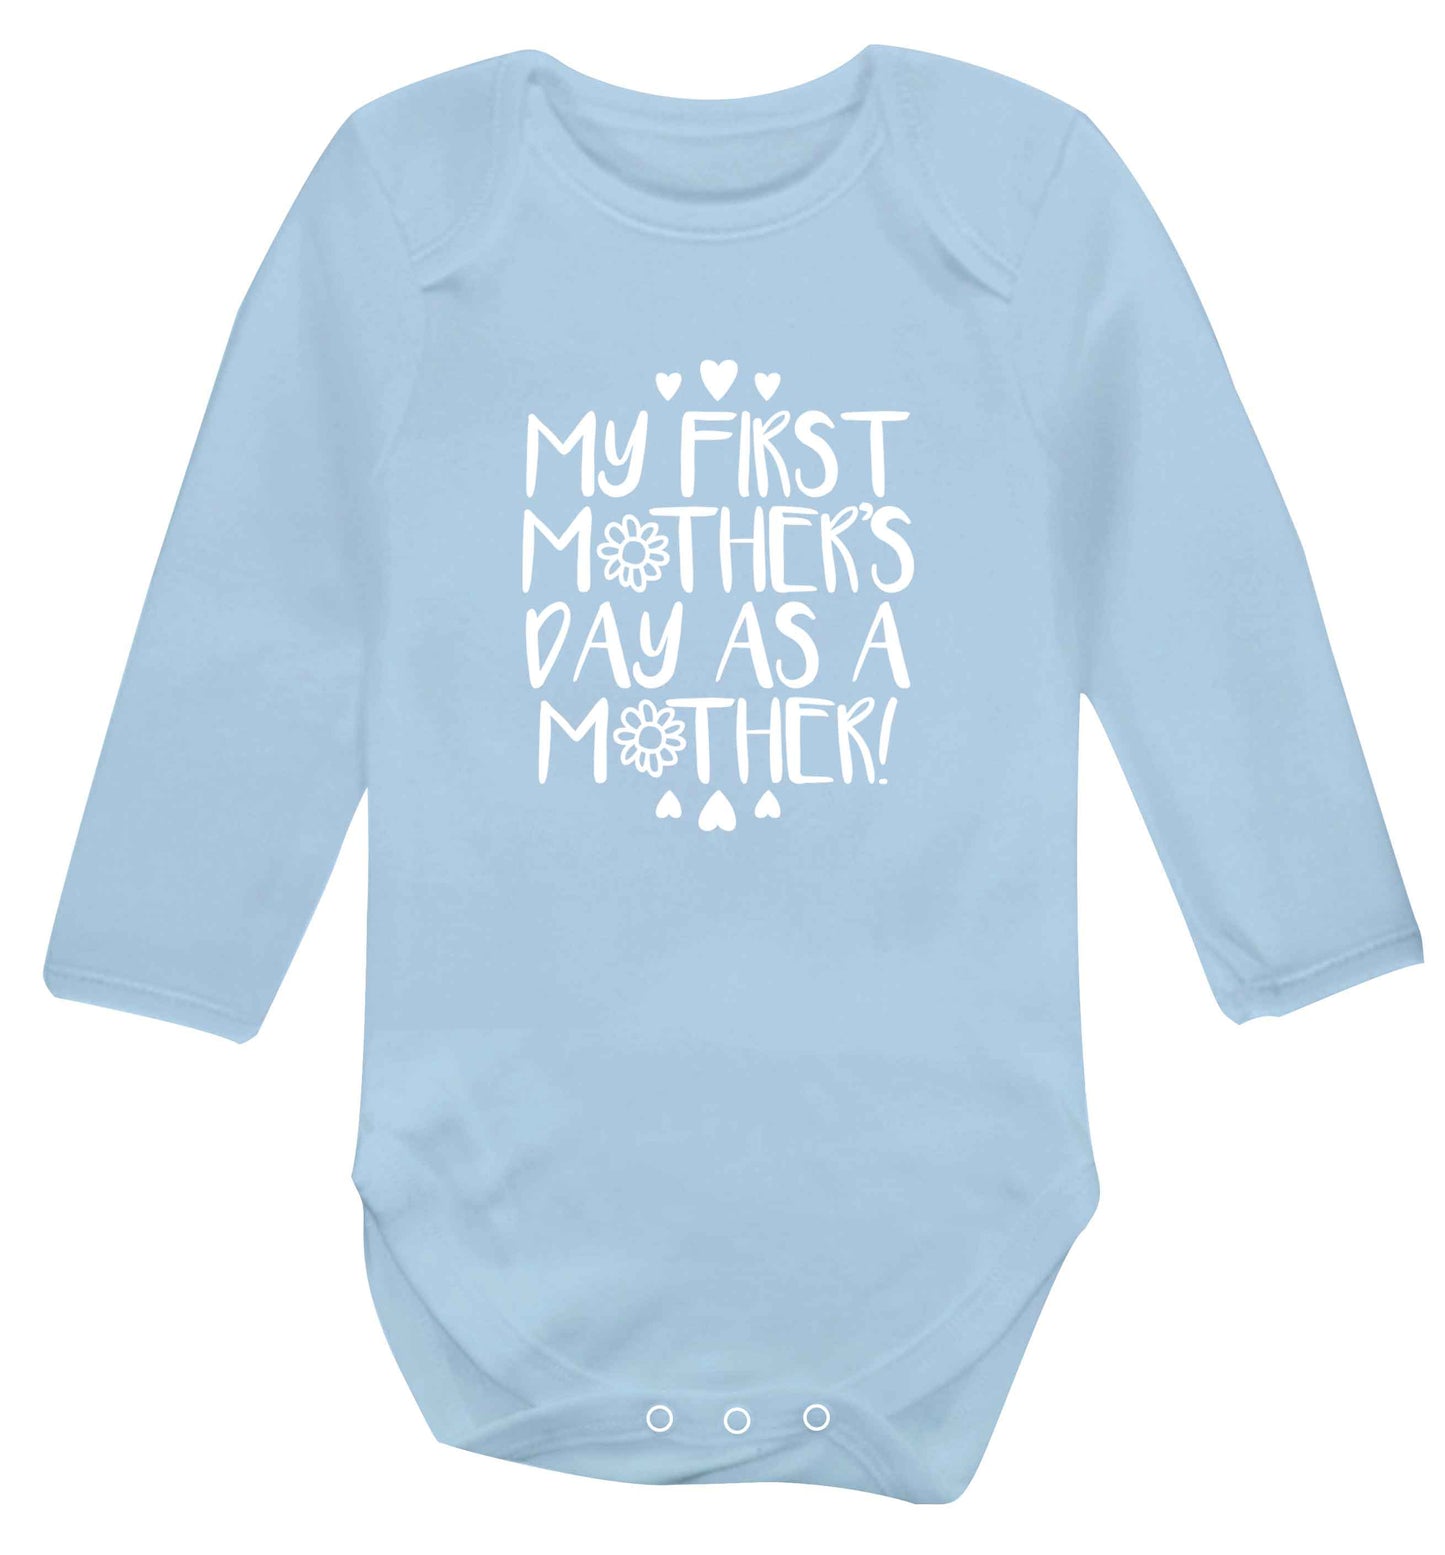 It's my first mother's day as a mother baby vest long sleeved pale blue 6-12 months